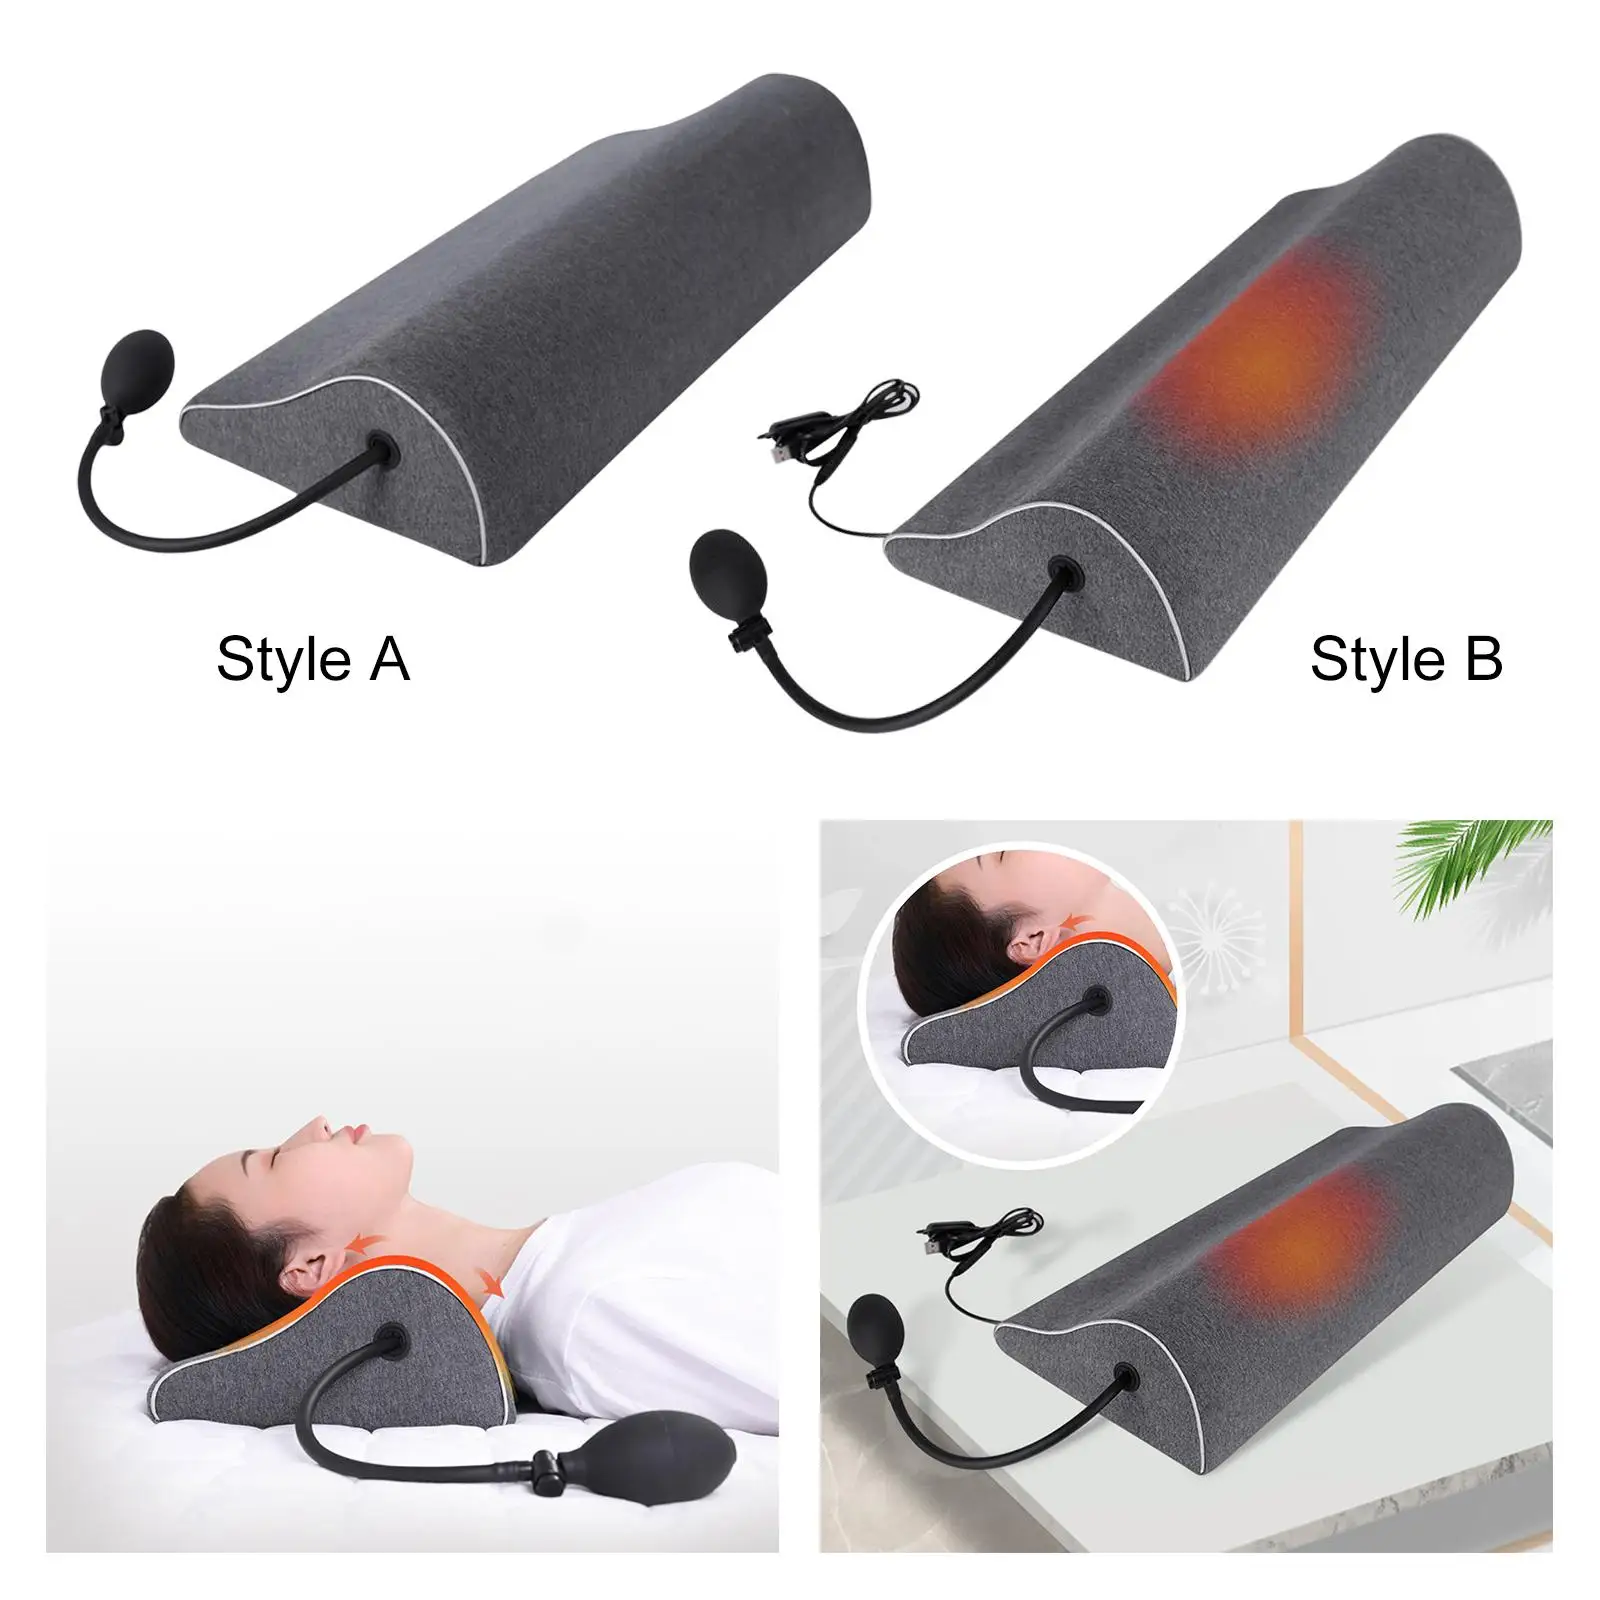 Adjustable Cervical Neck Traction Multiple Press Pump Pillows Soft Cervical Traction Device for Travel Hiking Gift Working Home